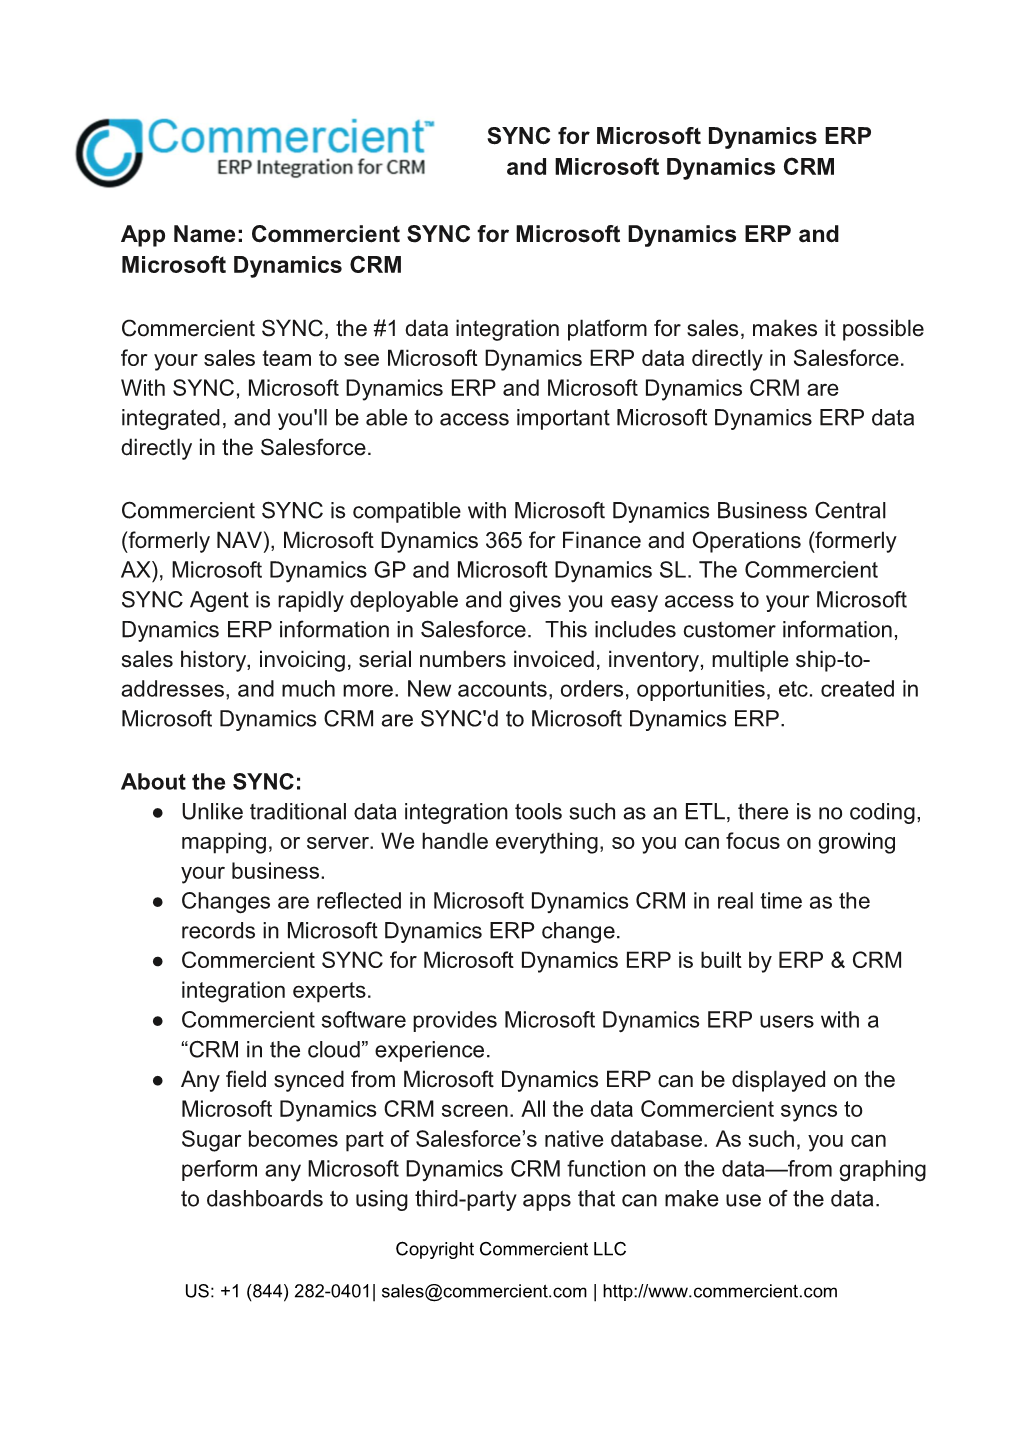 Commercient SYNC for Microsoft Dynamics ERP and Microsoft Dynamics CRM